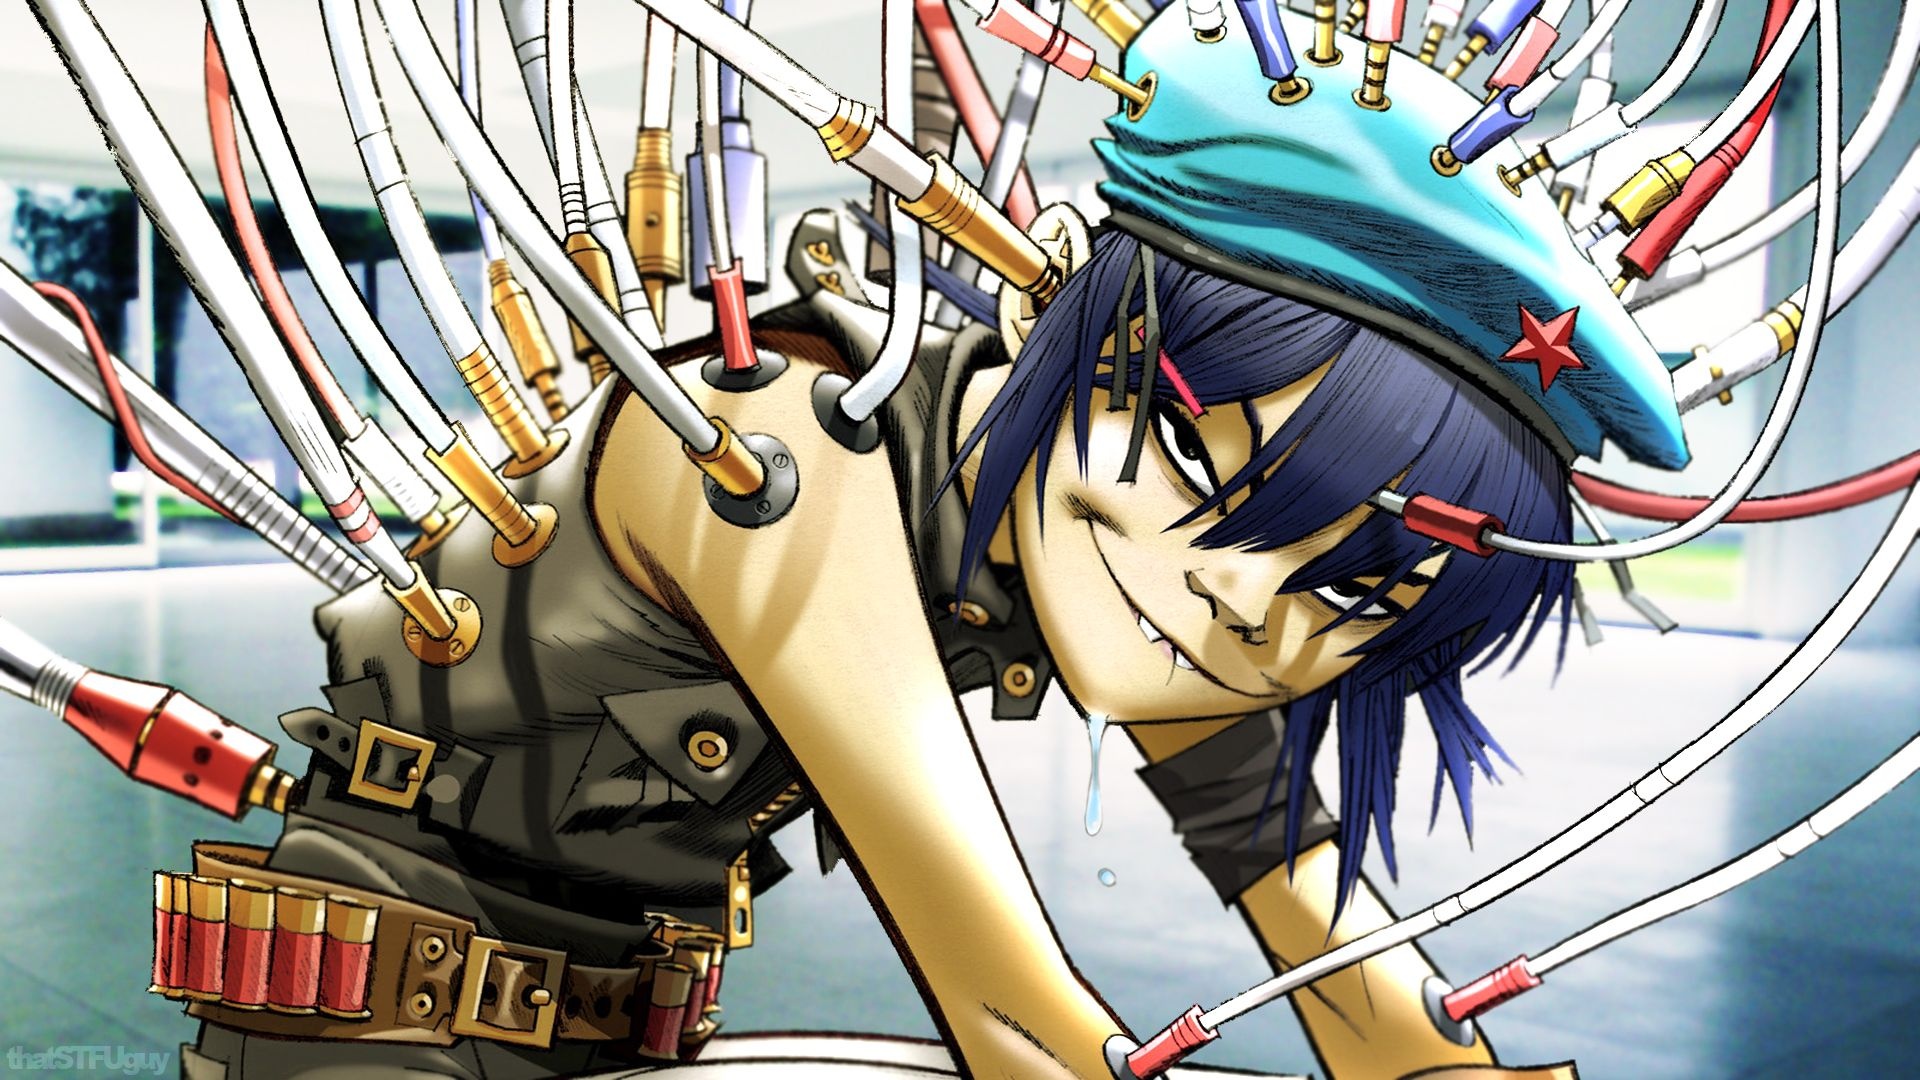 Noodle (Gorillaz): The character designed as the guitarist, occasional keyboardist, and backup vocalist, Animated group. 1920x1080 Full HD Background.